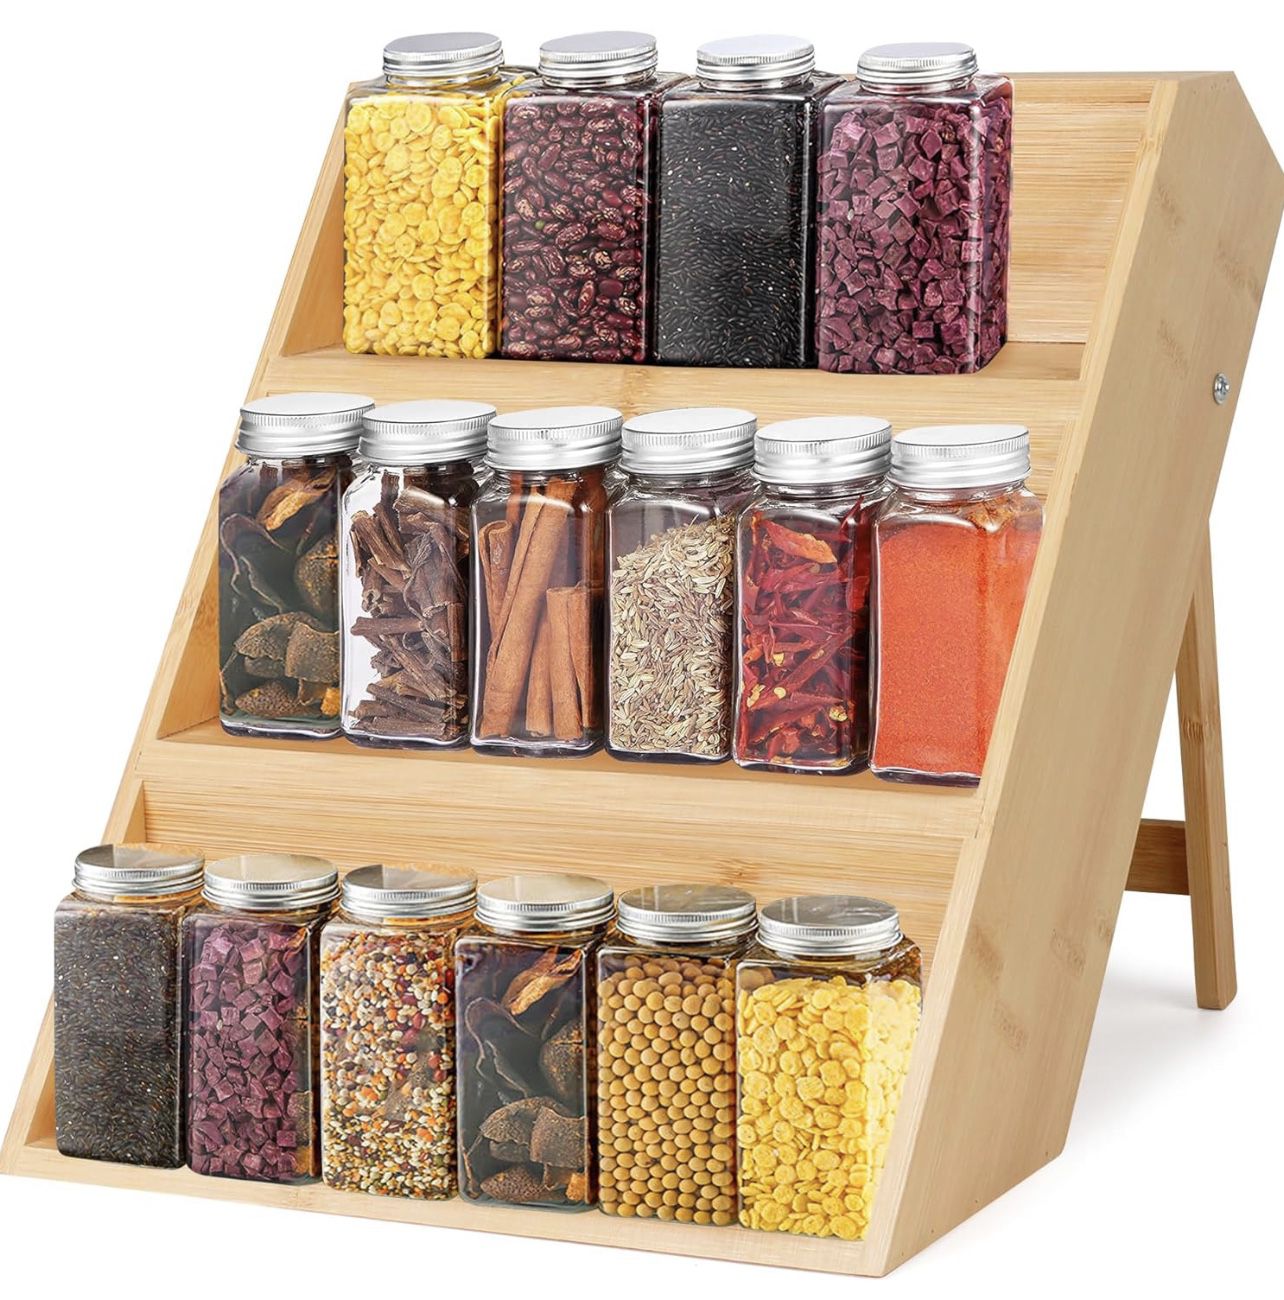 Bamboo Spice Rack Organizer for Cabinet, Foldable 3-Tier Spice Shelf